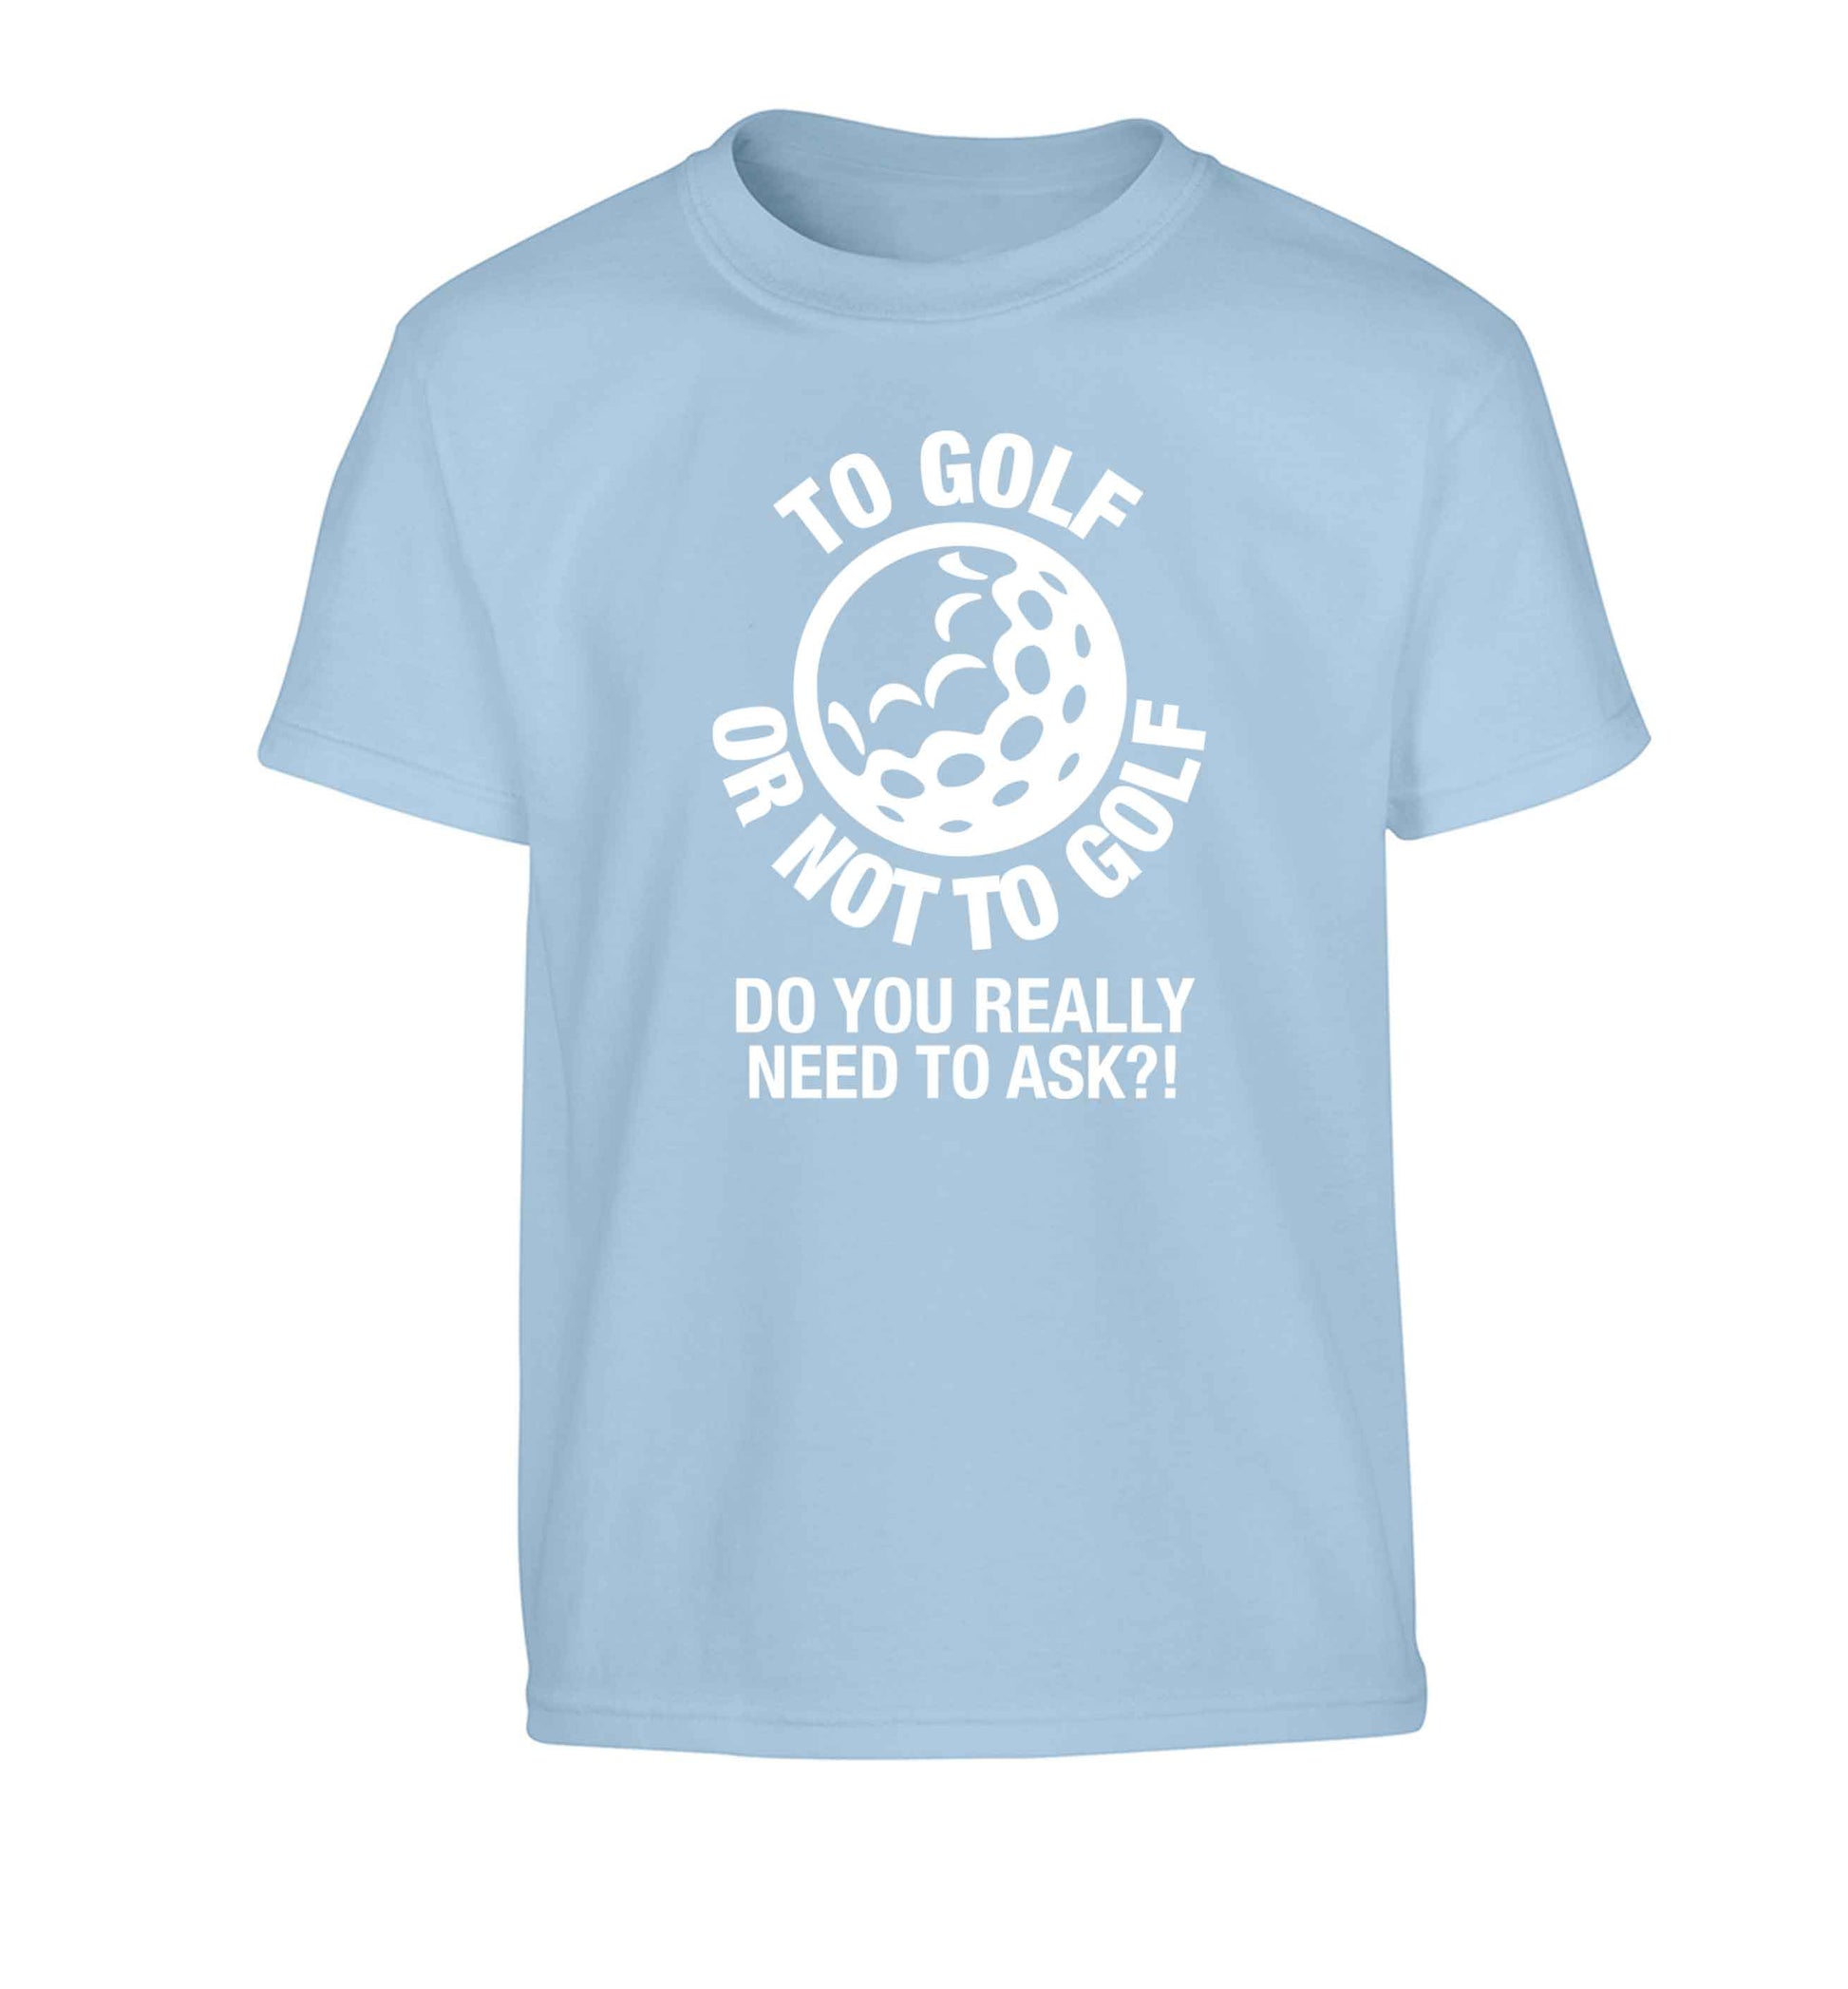 To golf or not to golf Do you really need to ask?! Children's light blue Tshirt 12-13 Years